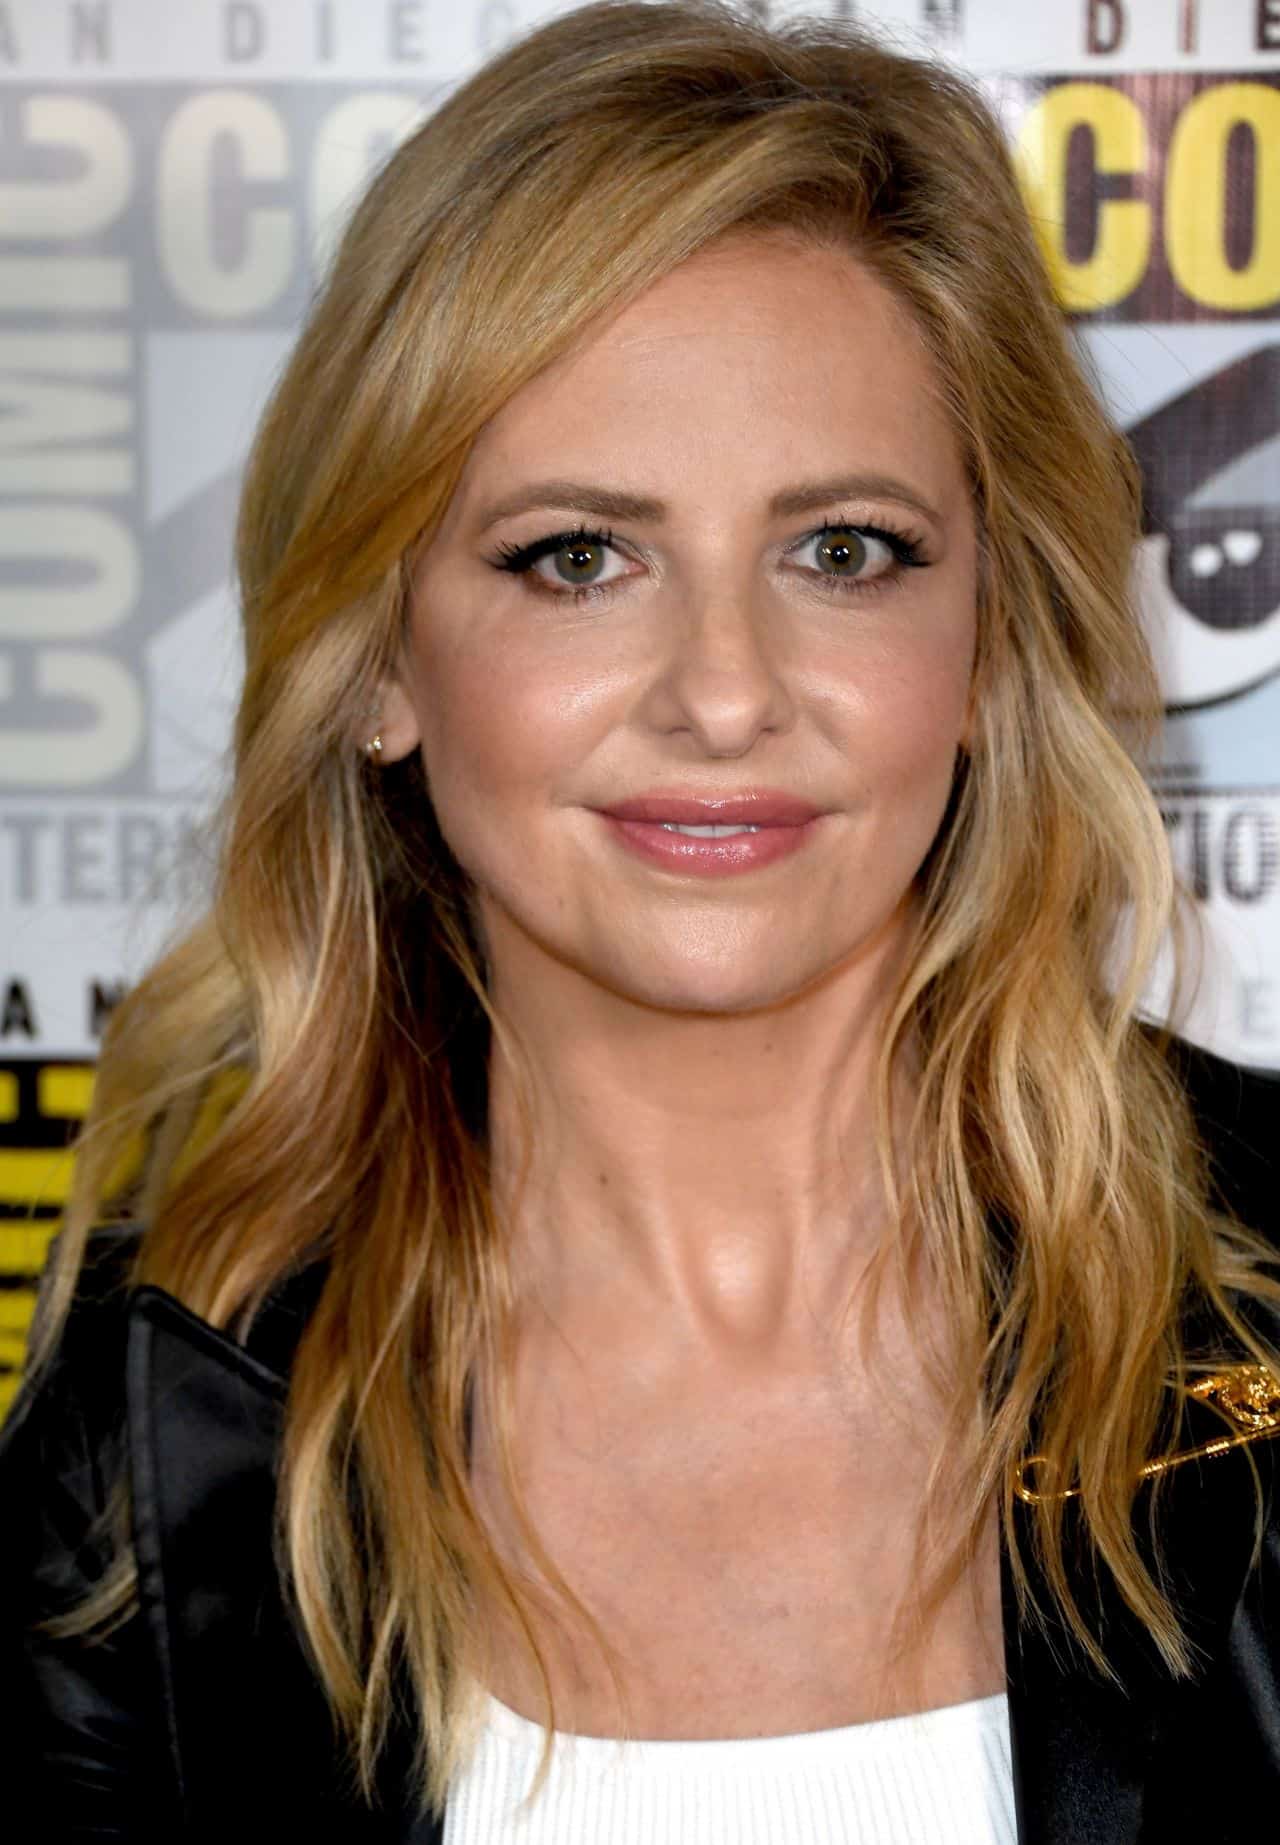 Sarah Michelle Gellar Looks Awesome in Leather Outfit at the 2022 Comic-Con